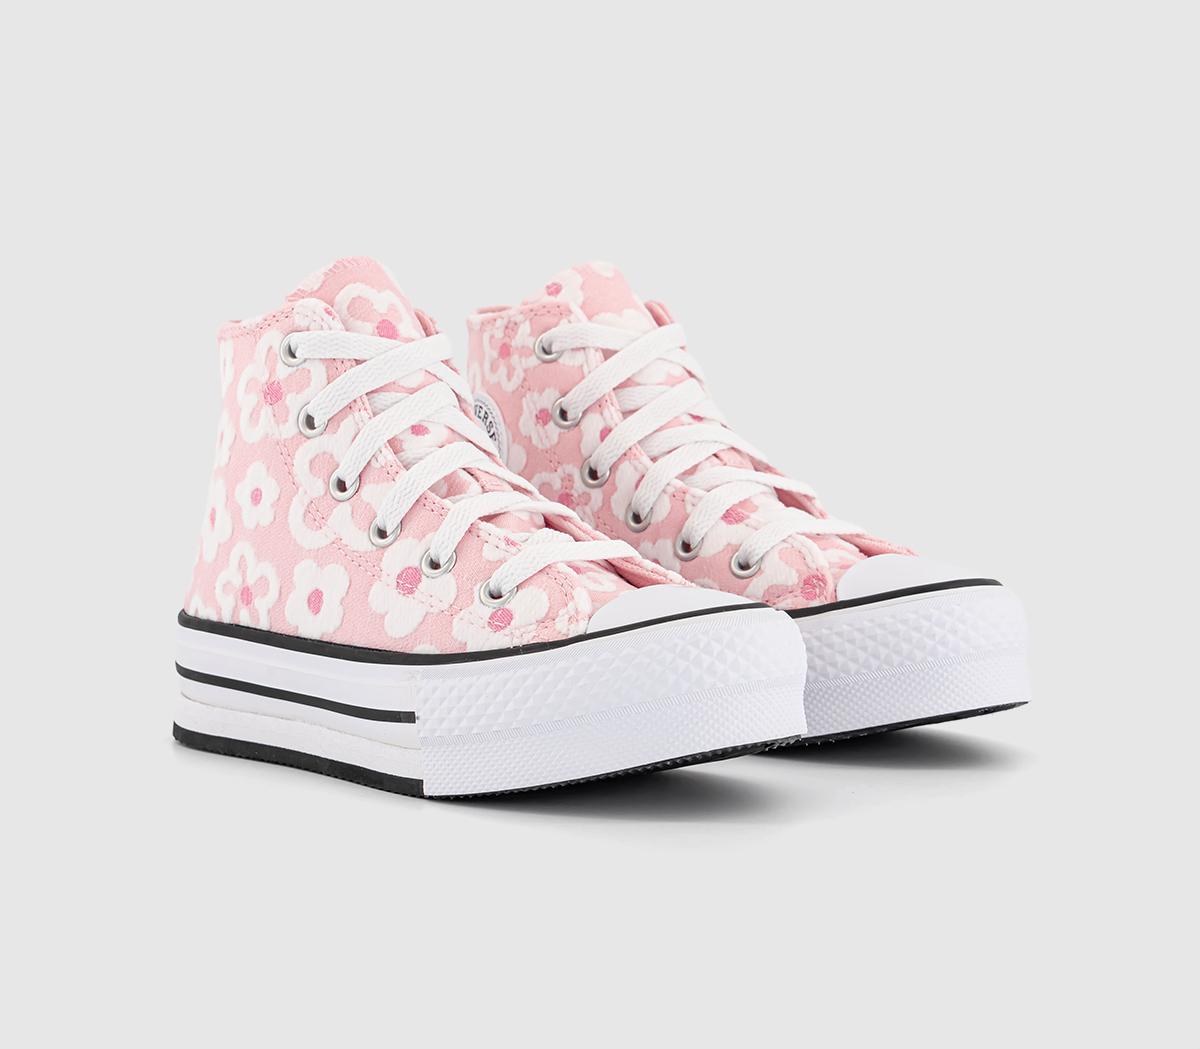 Converse Kids All Star Eva Lift Hi Youth Trainers Donut Glaze Oops Pink White, 2